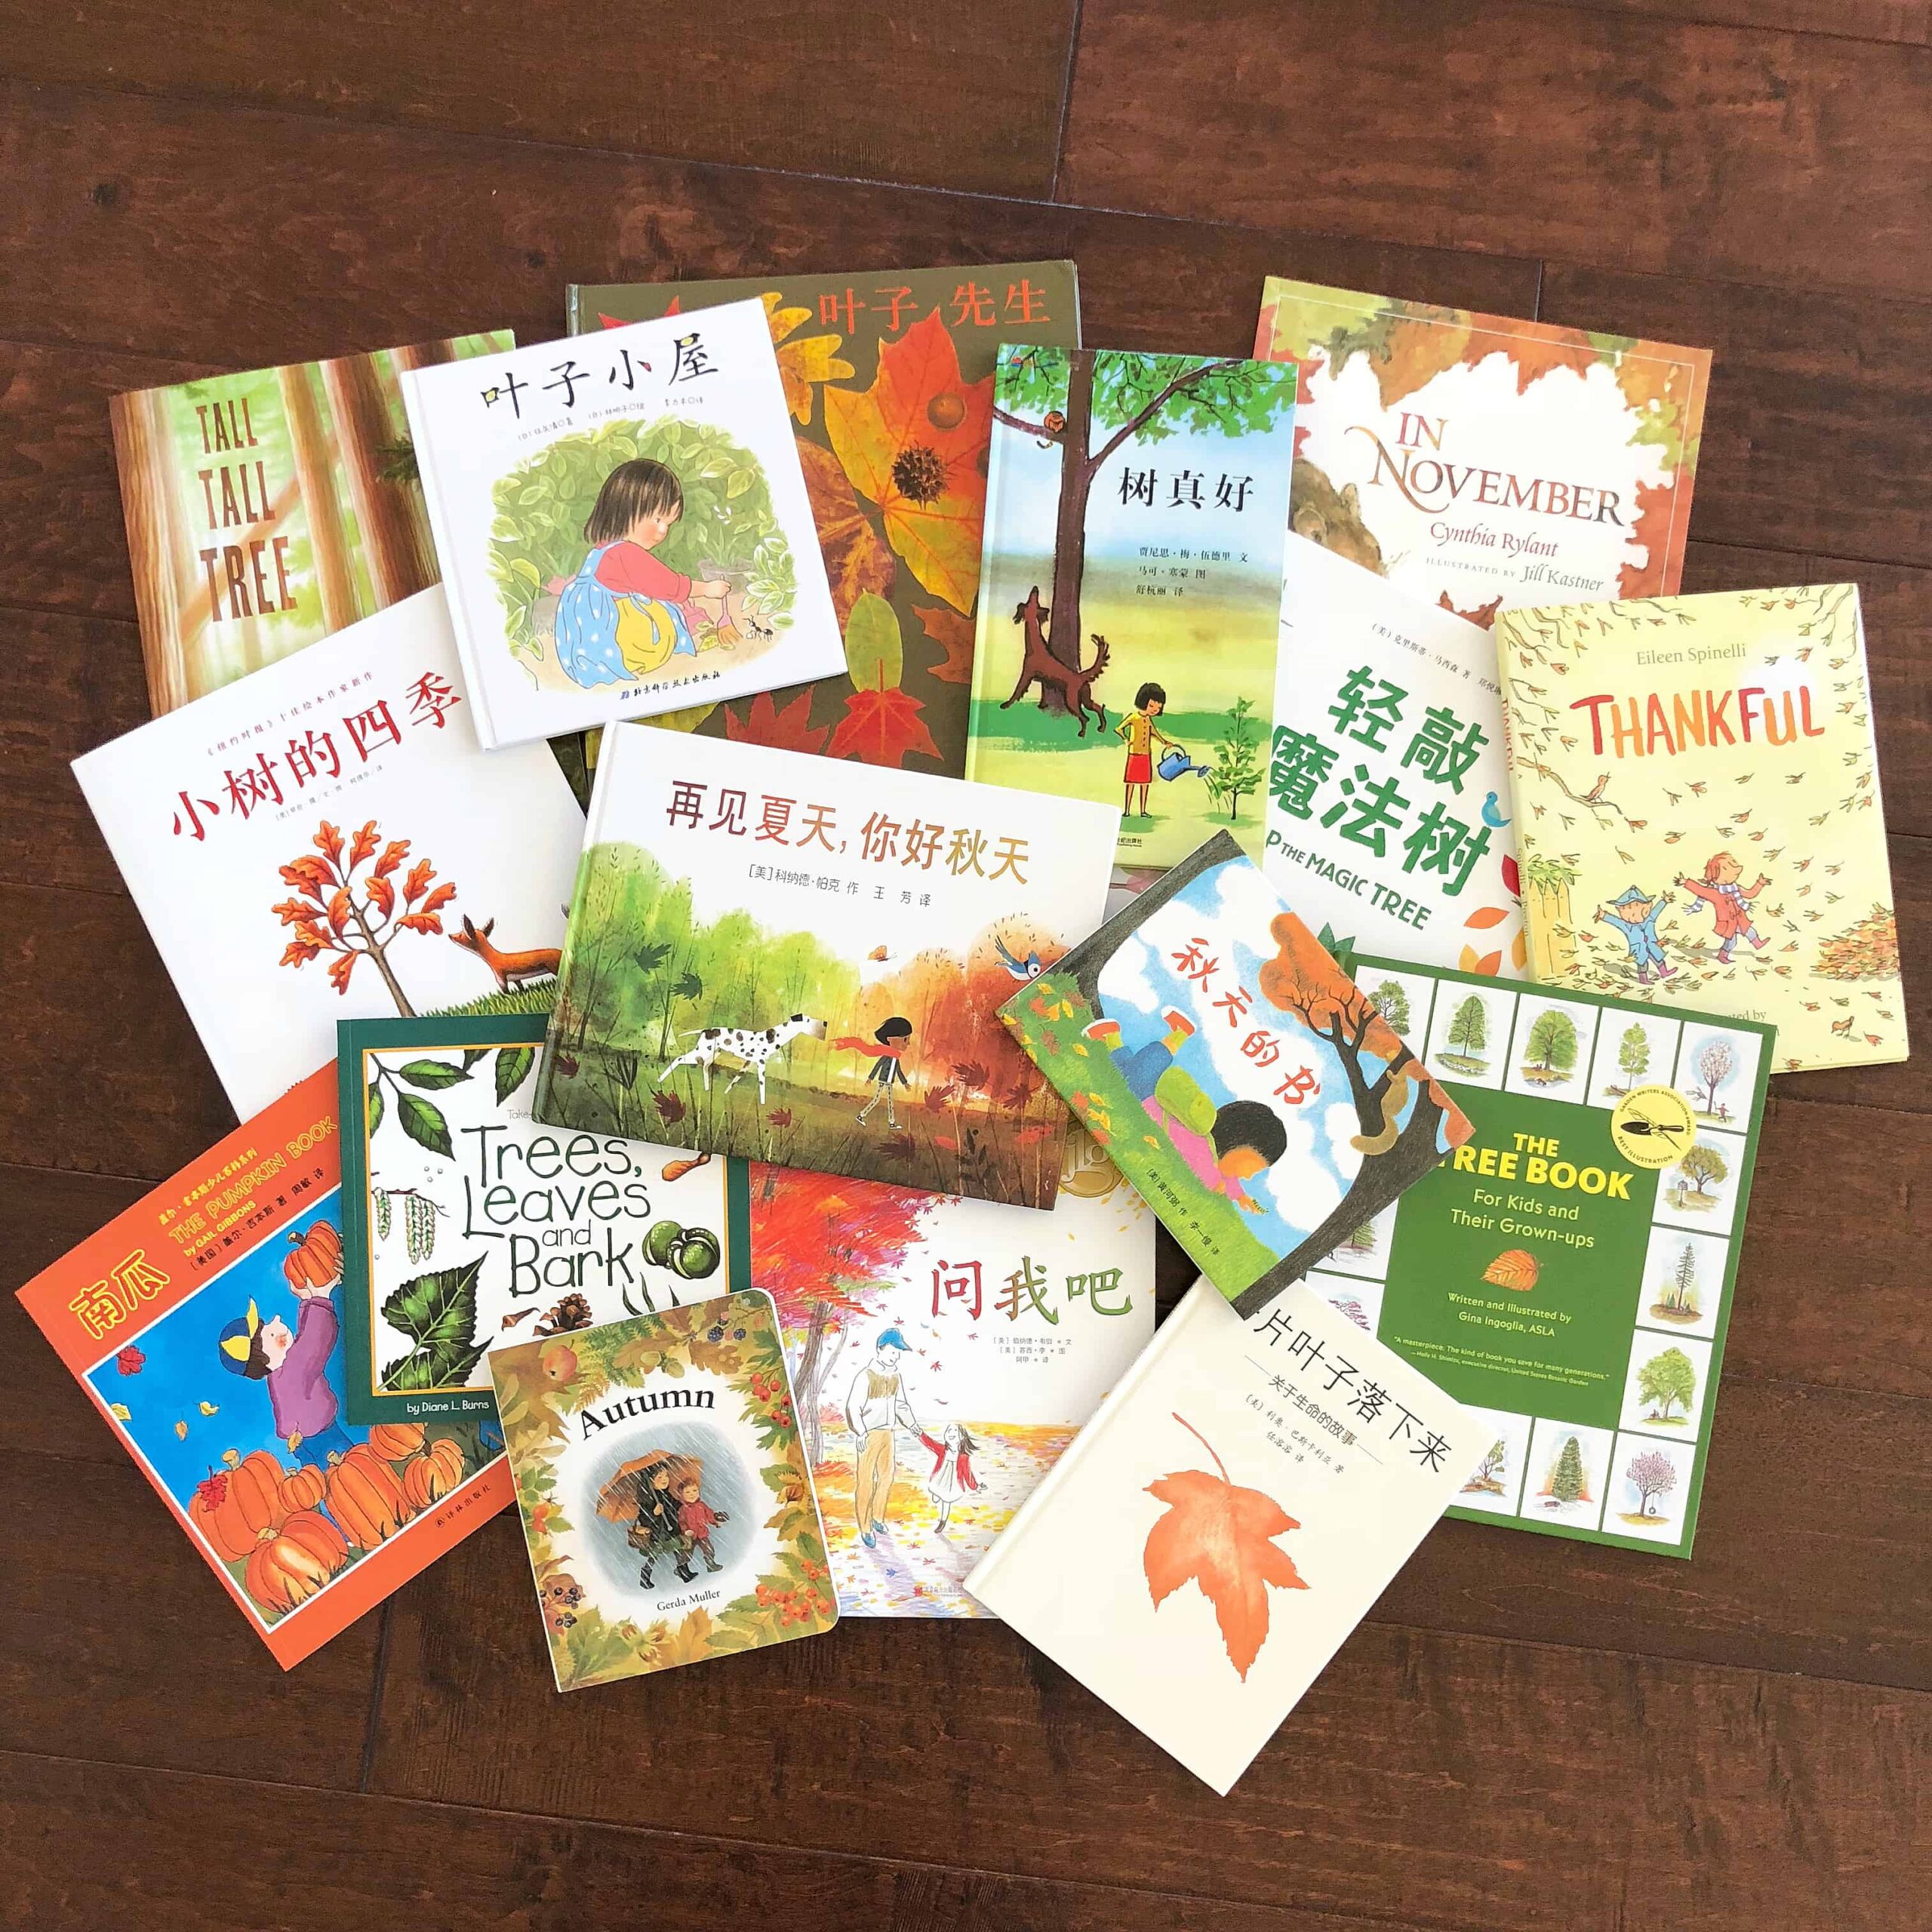 15 Tree and Autumn Books for Kids in Chinese and English